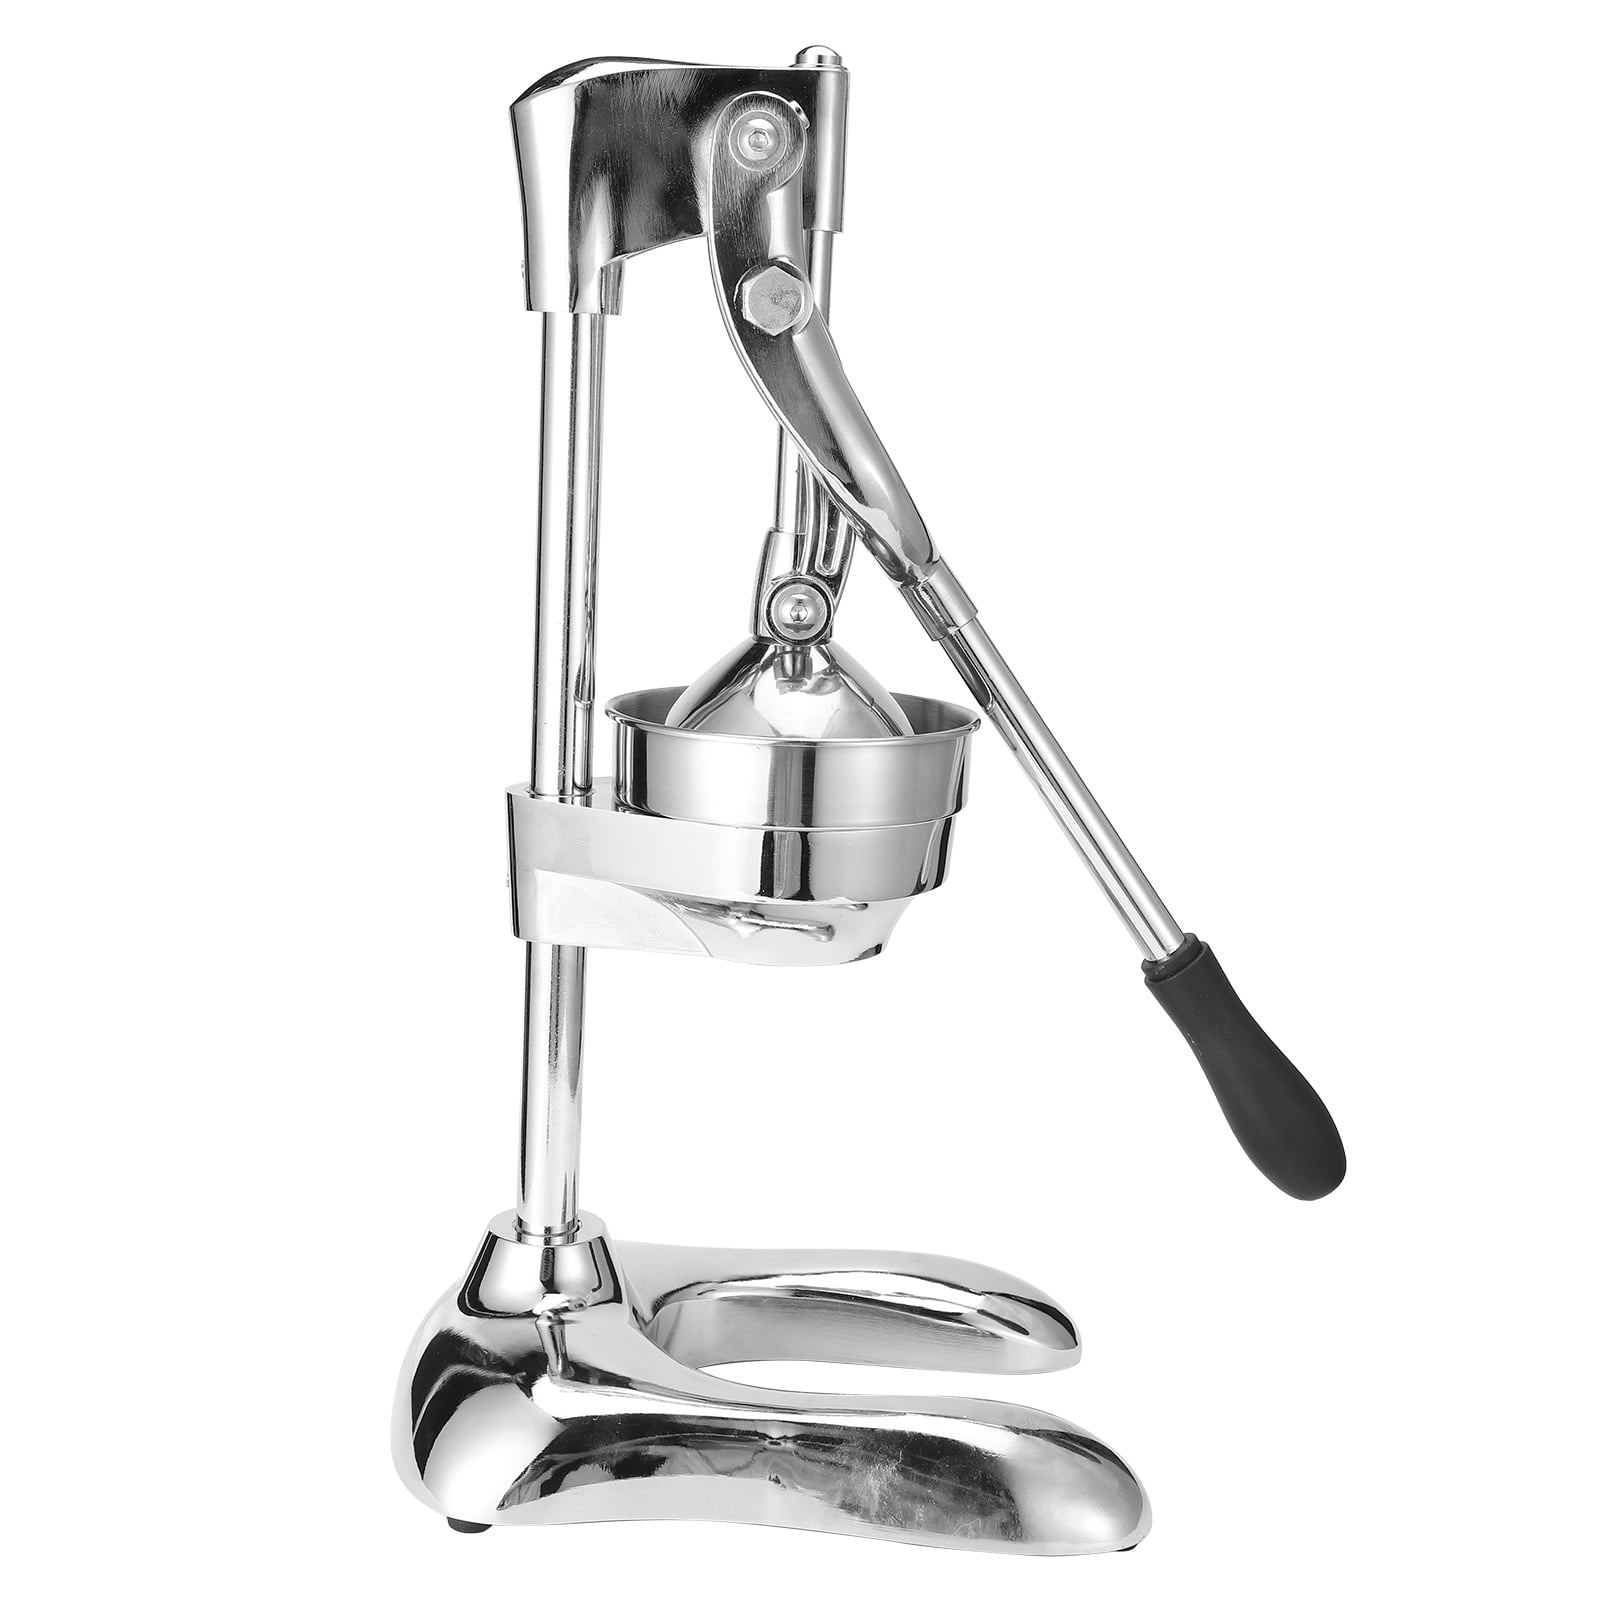 Manual Hand Juicer for the freshest juice - Infinity Store USA